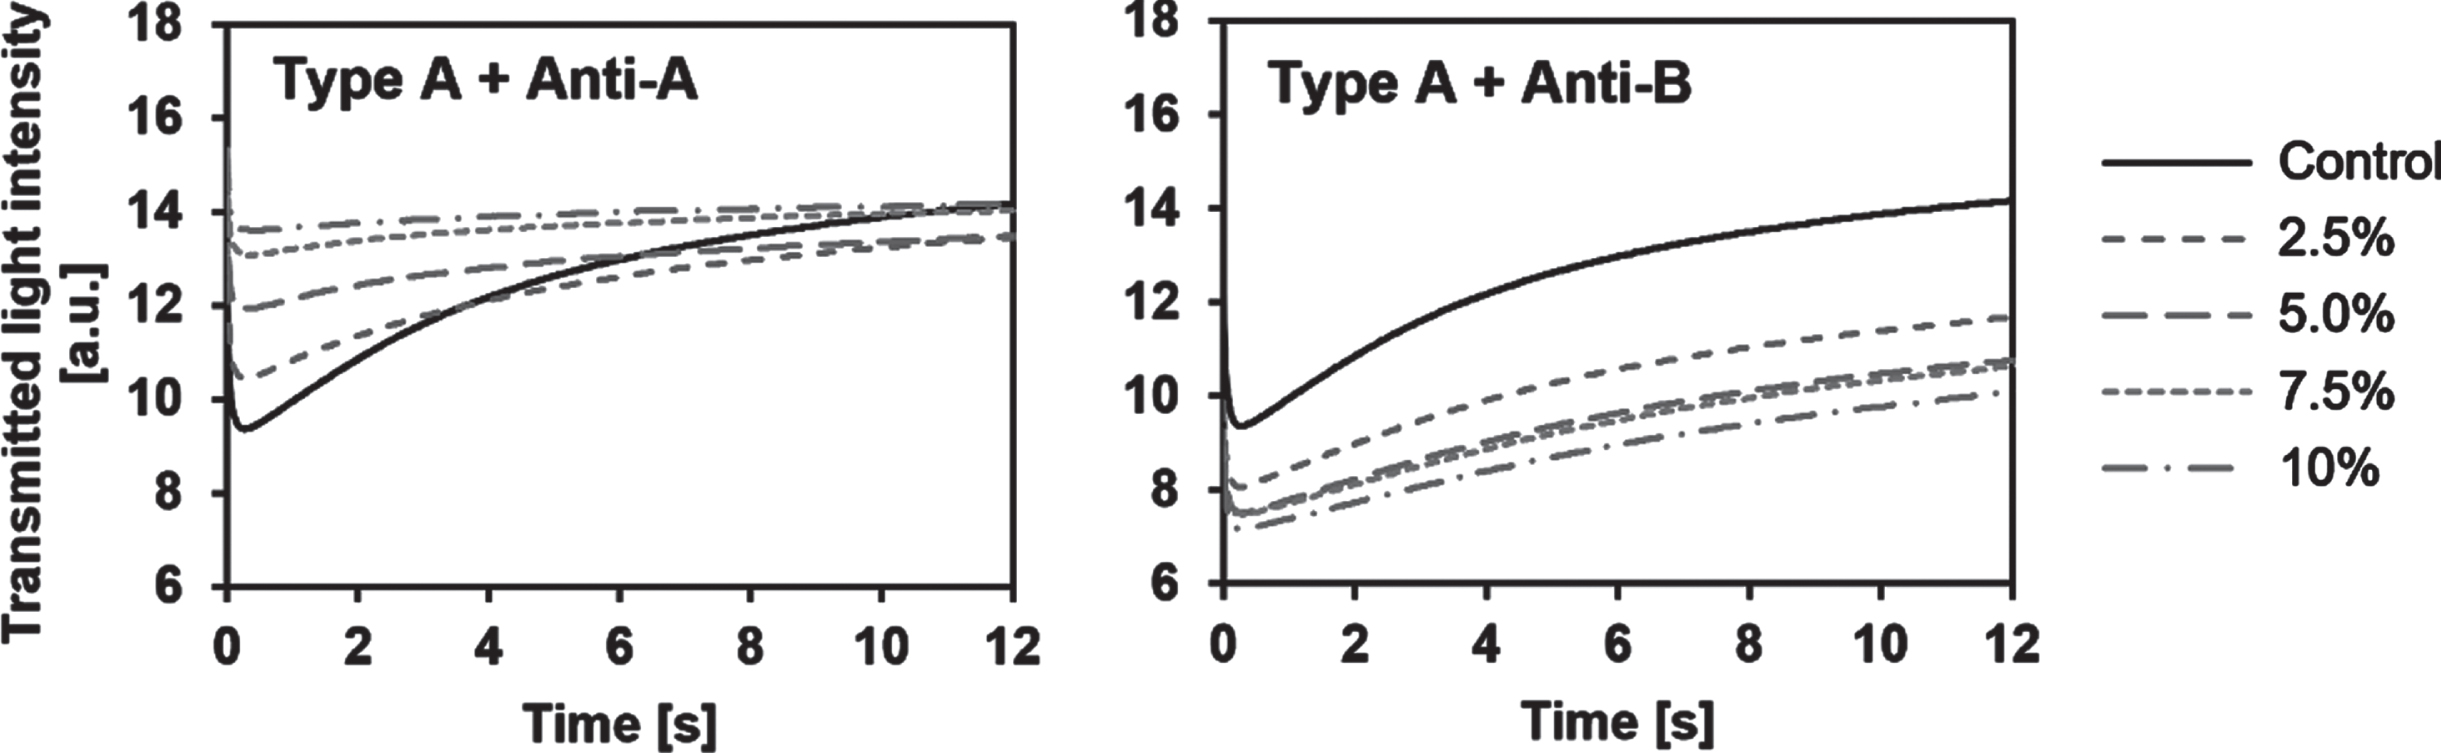 Syllectogram from a representative measurement of agglutination-positive and -negative samples (blood type A with the addition of anti-A or anti-B antibody reagent at mixing rations of 0 (control), 2.5%, 5.0%, 7.5%, and 10).